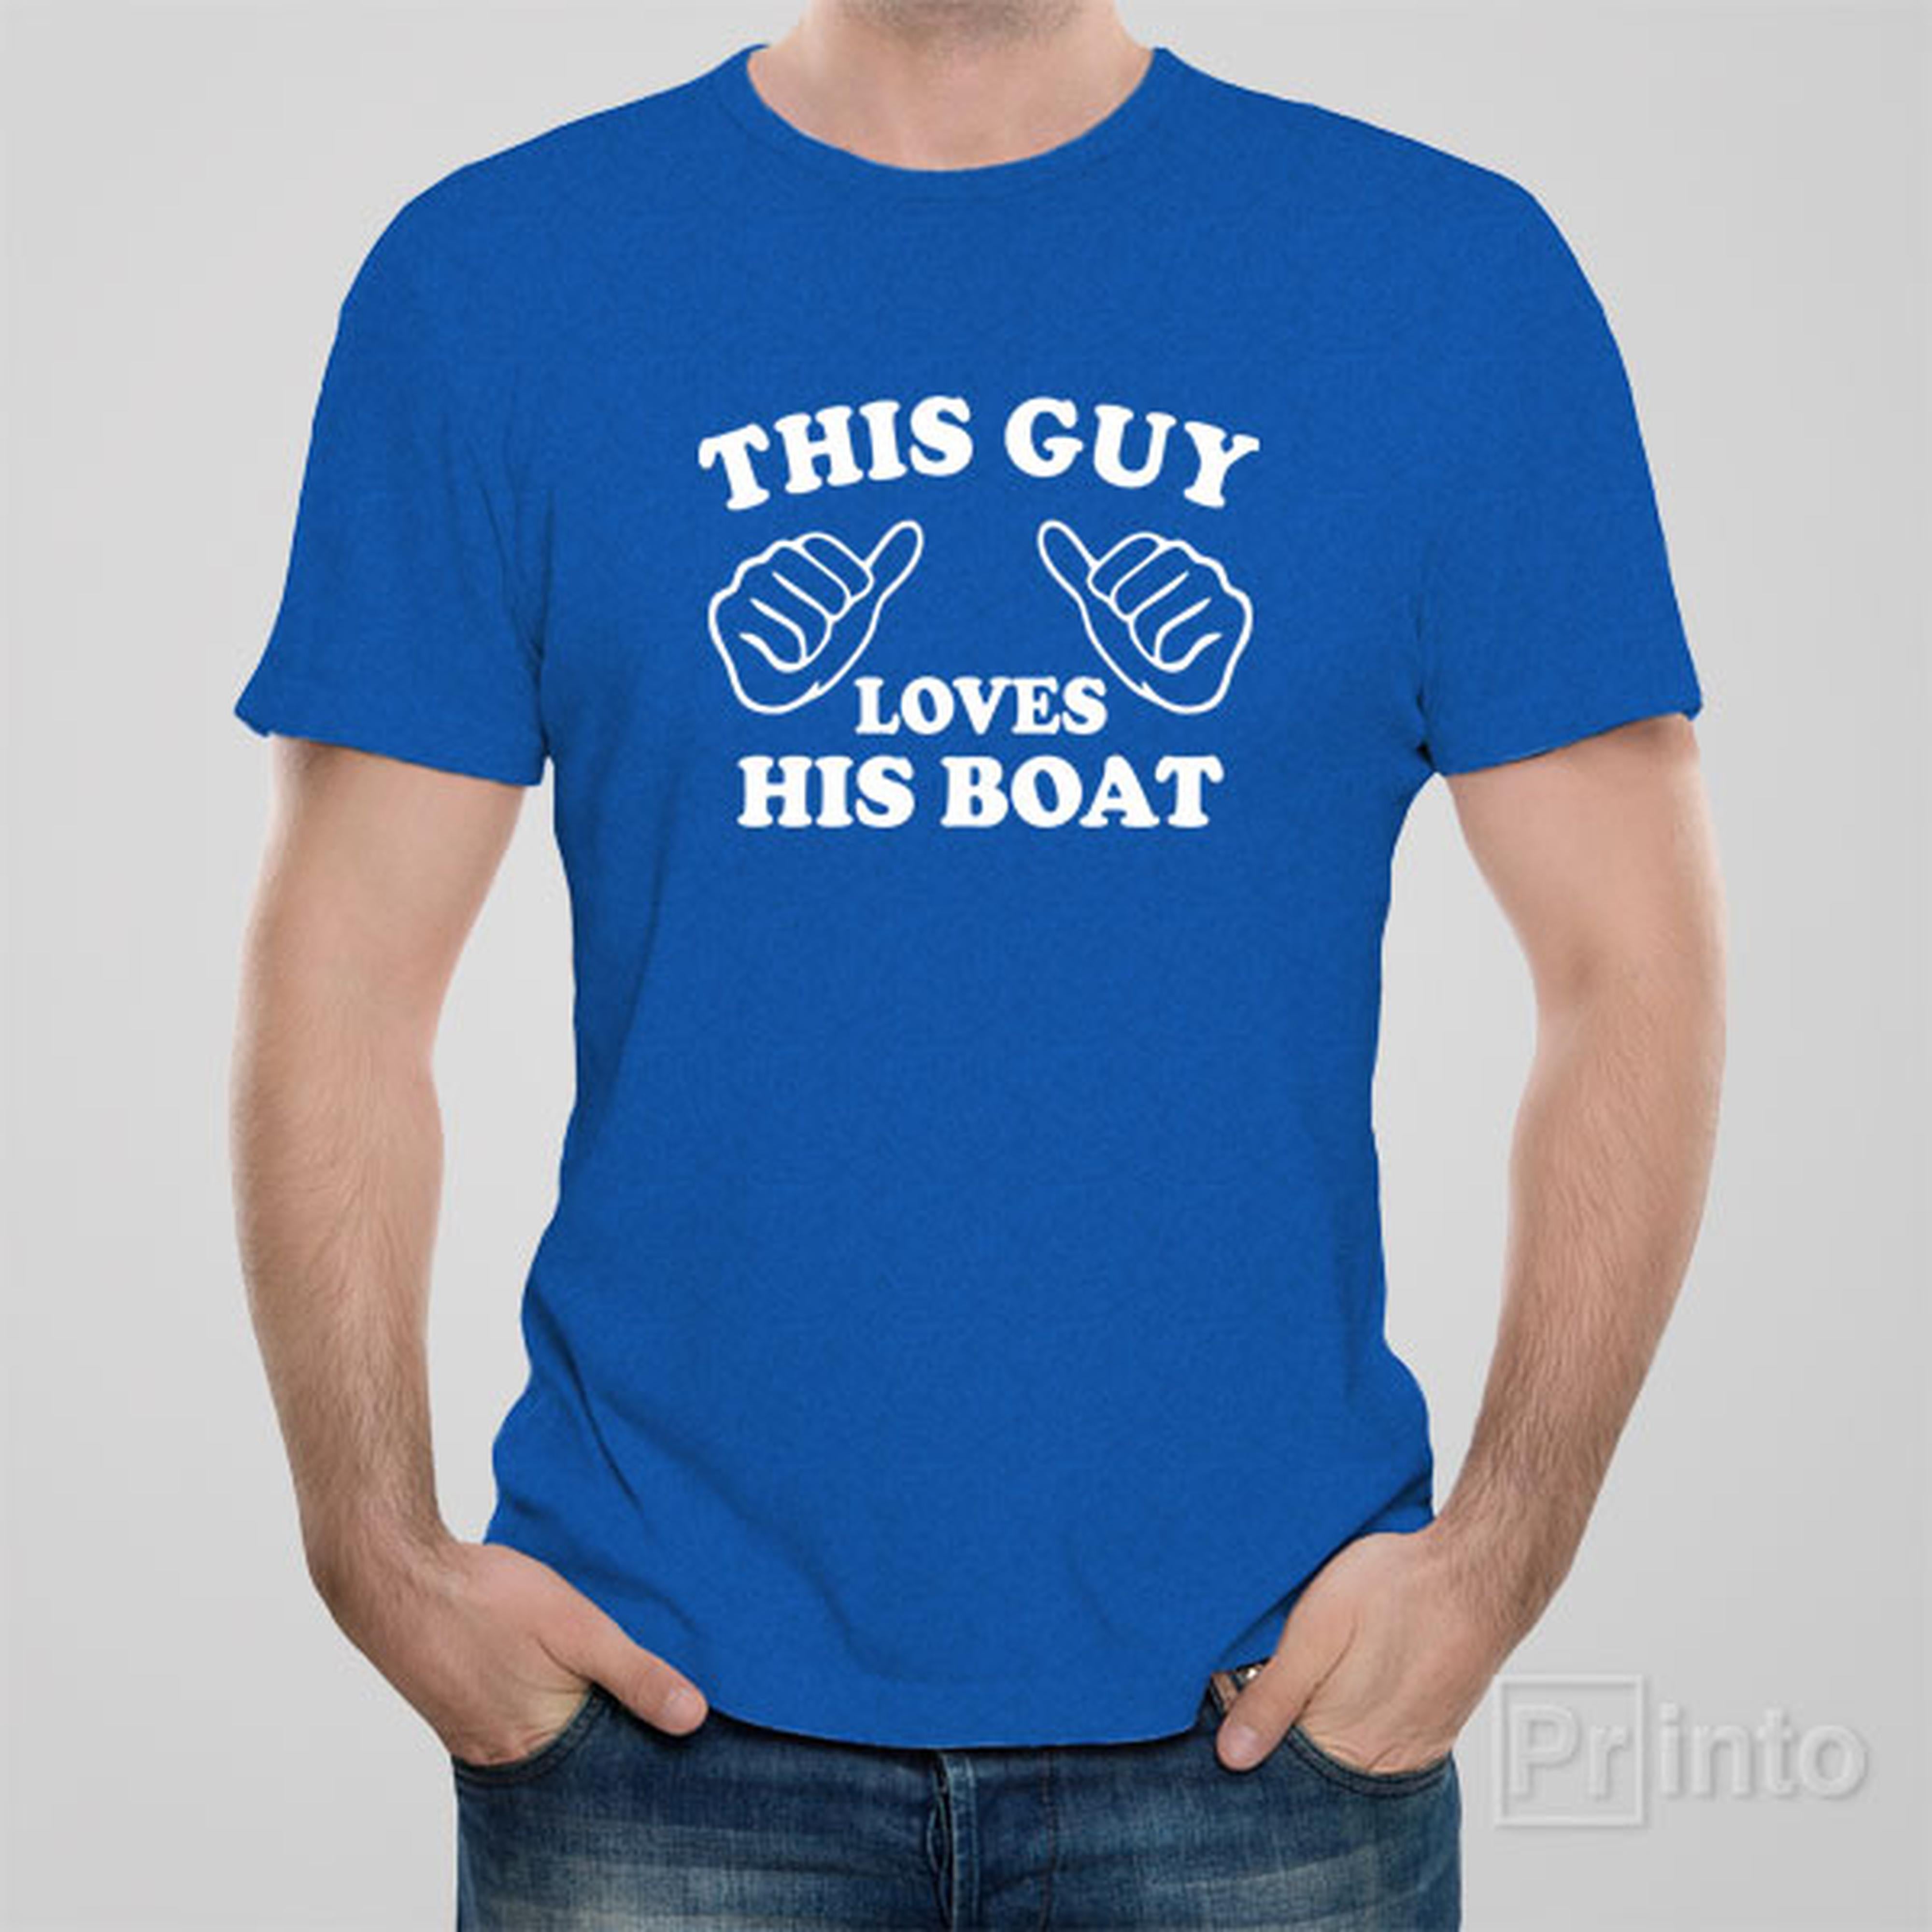 this-guy-loves-boat-t-shirt